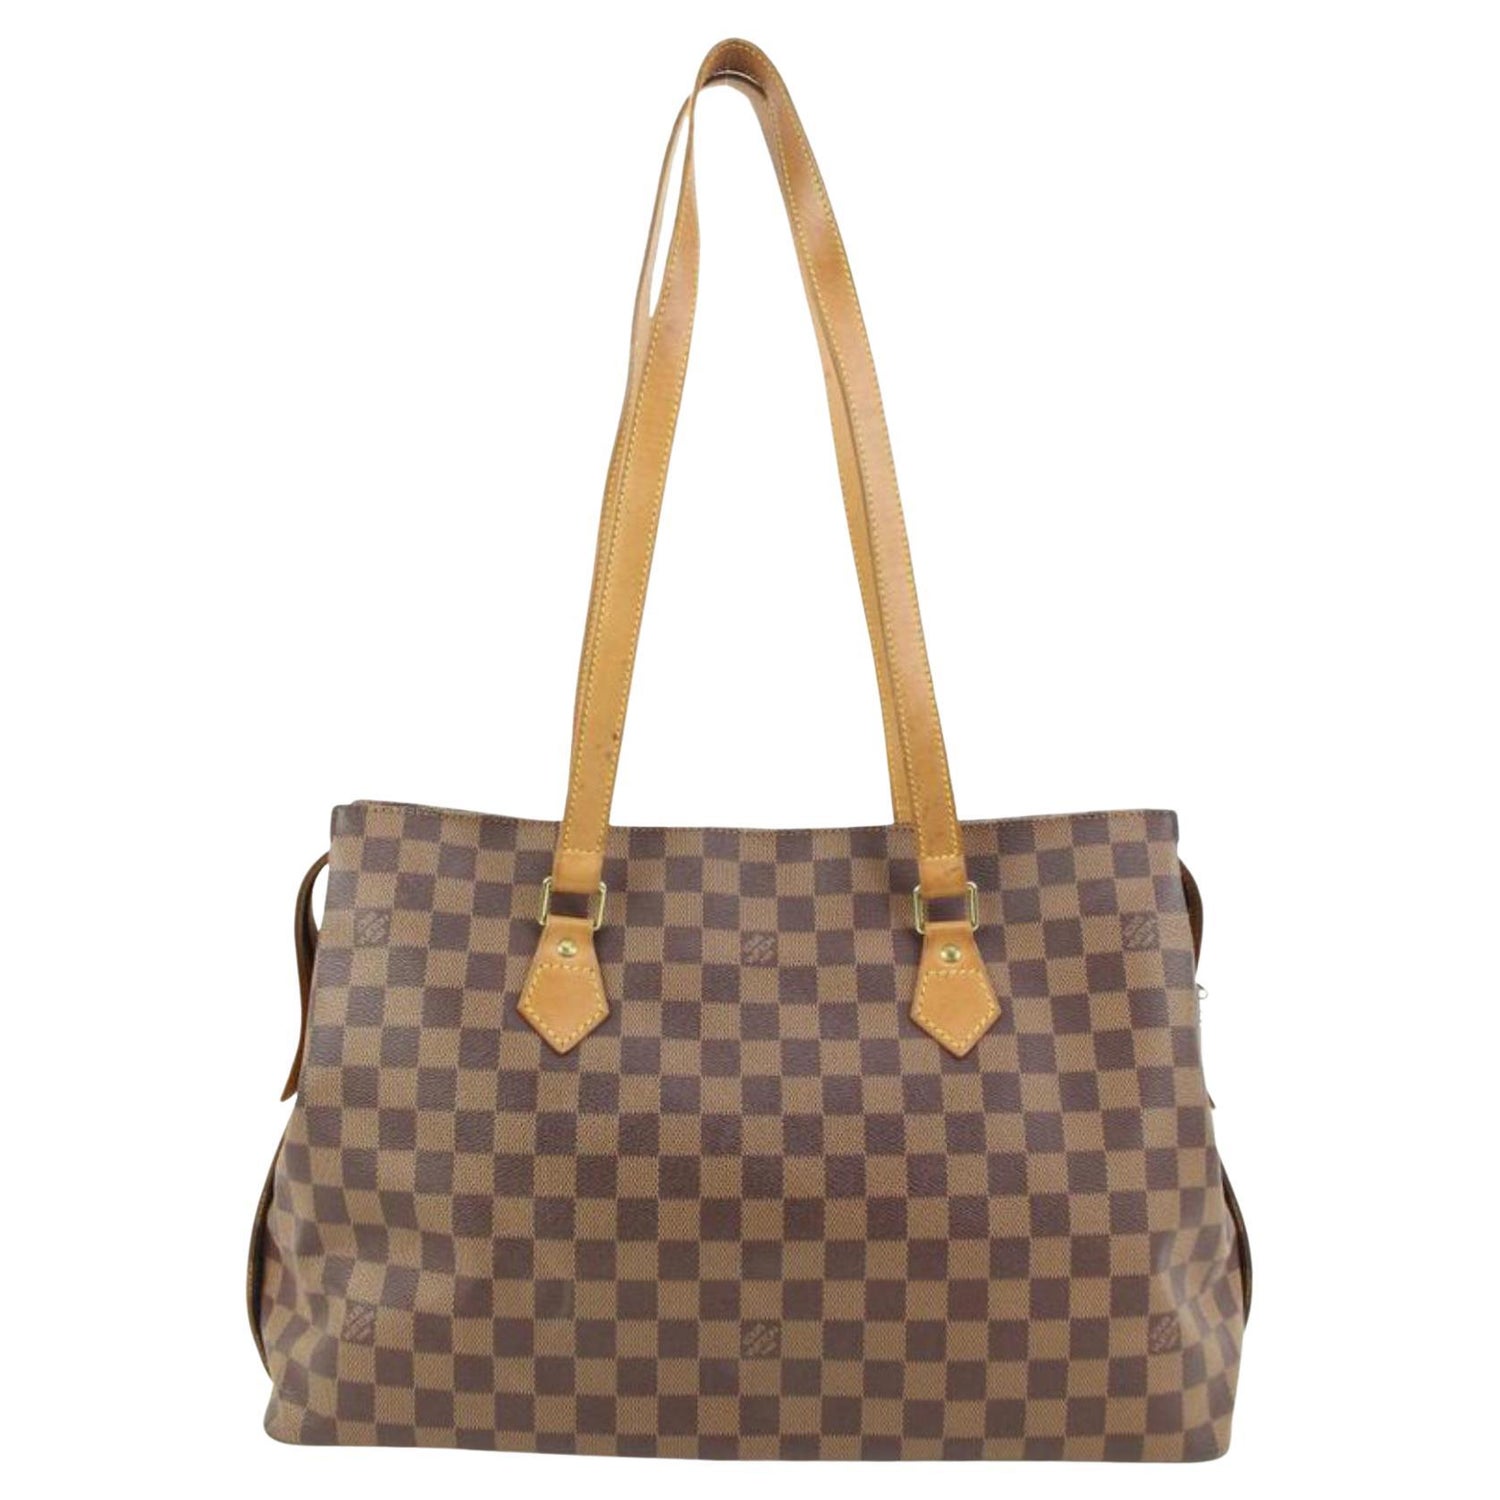 Louis Vuitton Totally Bags - 26 For Sale on 1stDibs  lv totally bag, totally  bag louis vuitton, totally louis vuitton bag